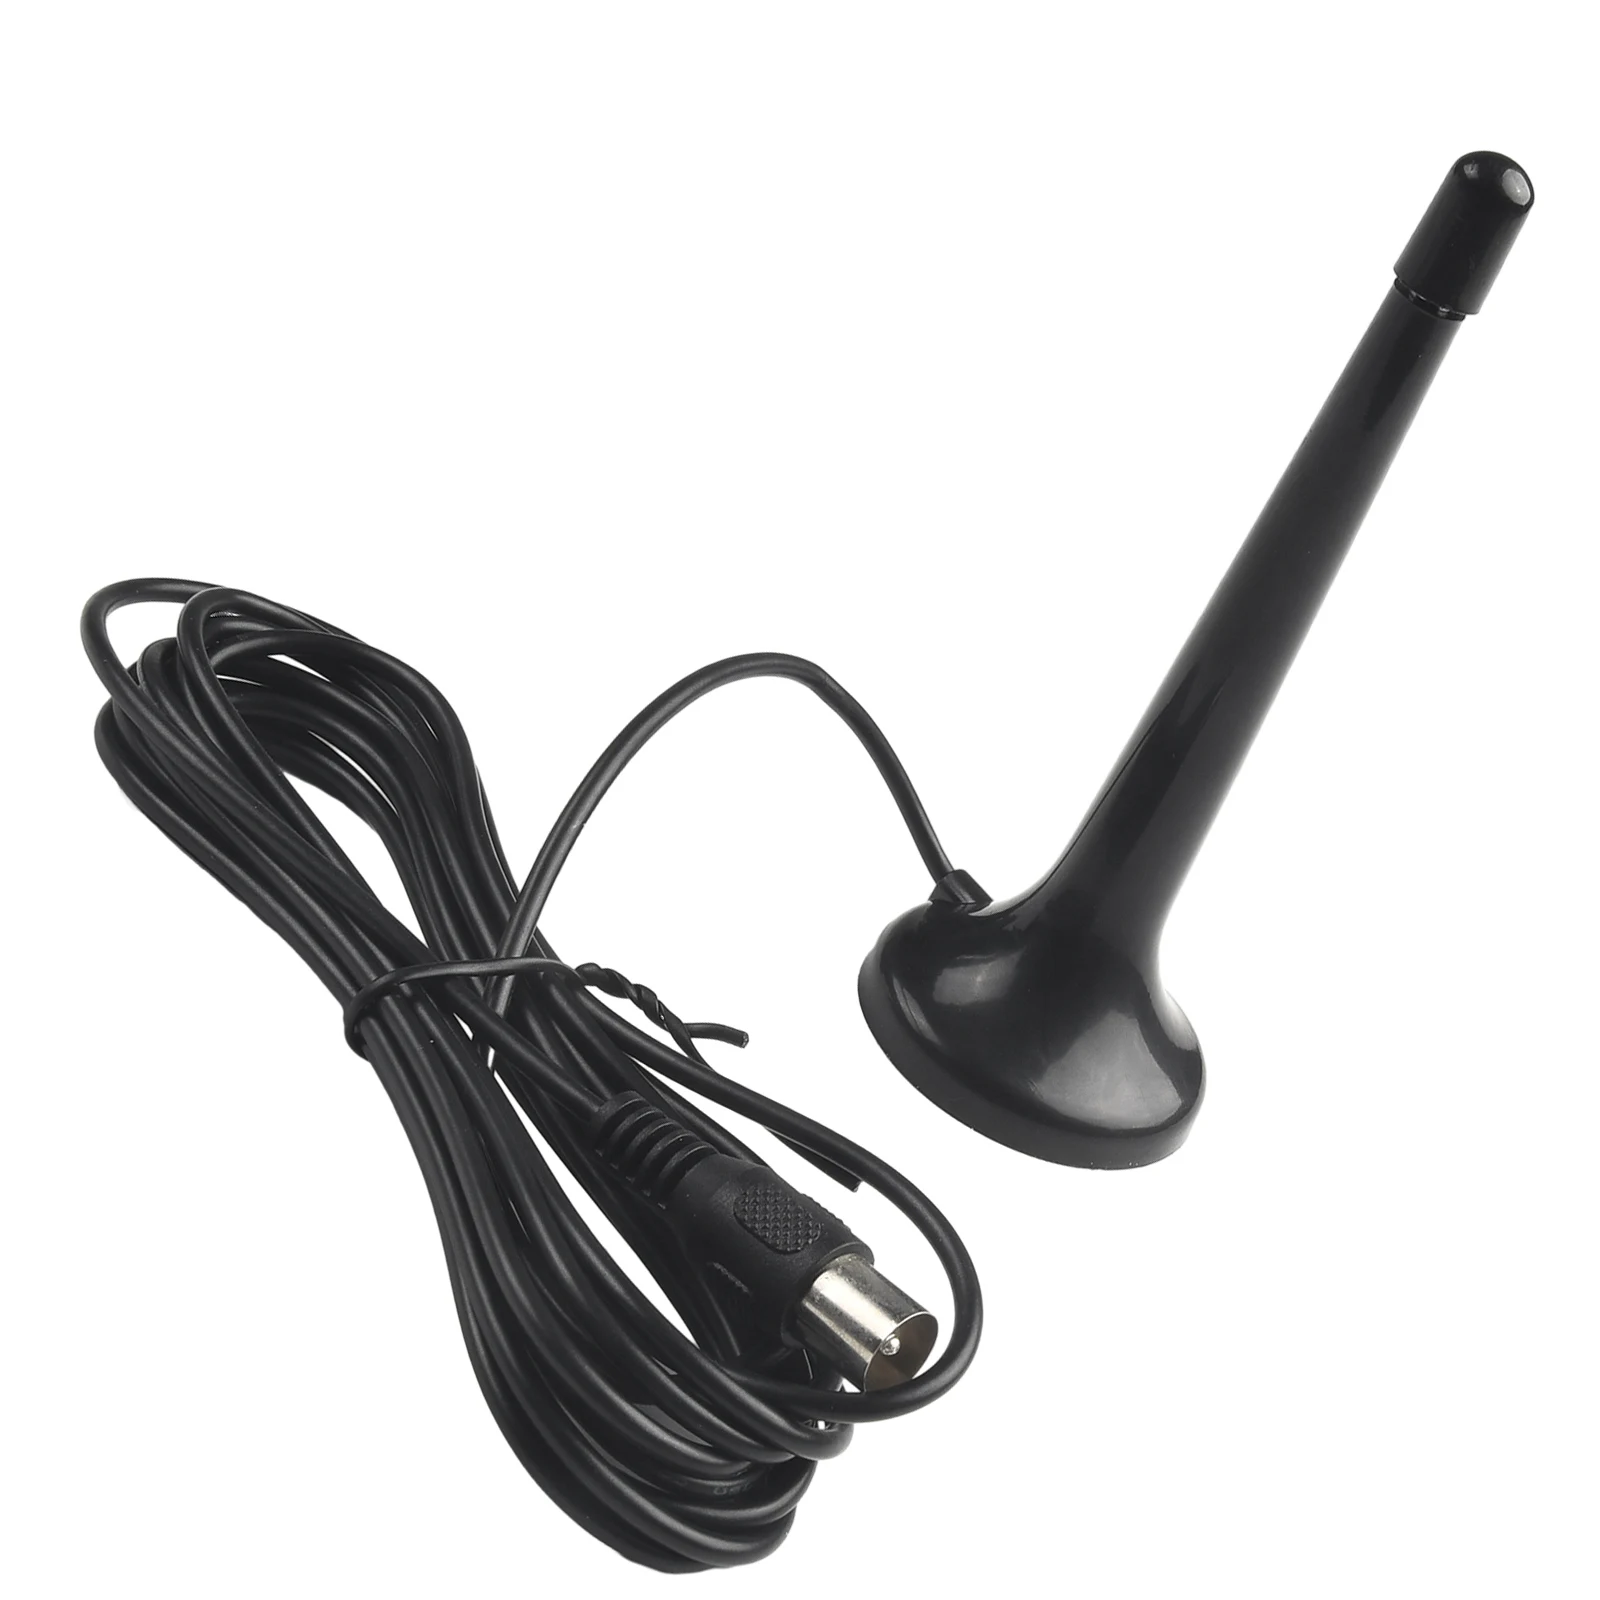 - Indoor DAB FM Radio Antenna with Suction Cup for Tuner Stereo - $17.62